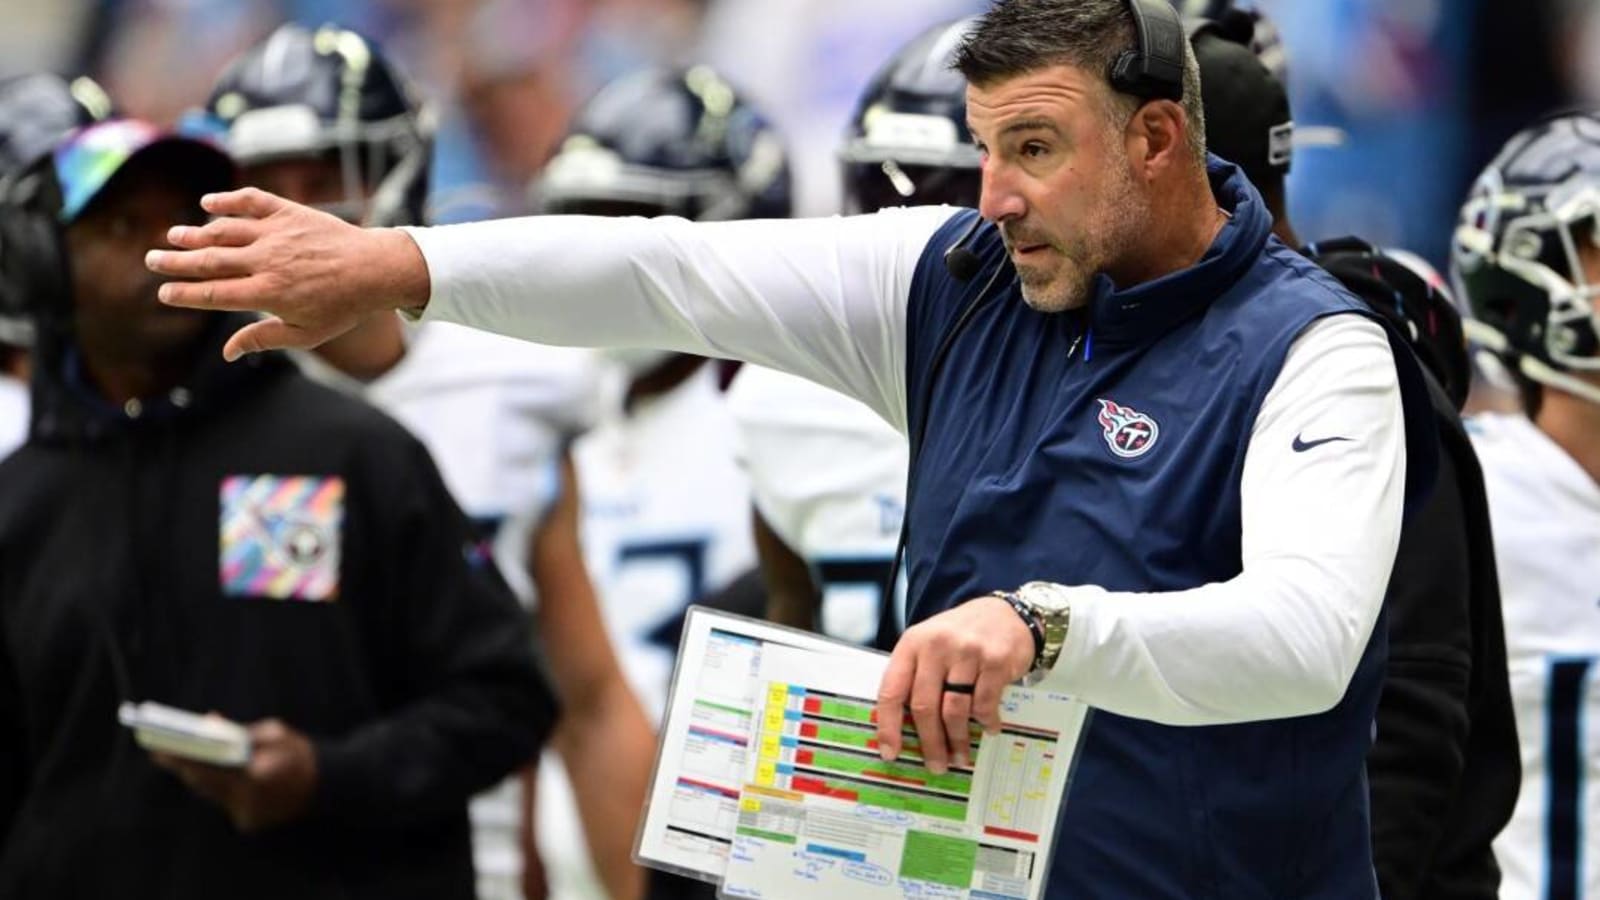 Ex-Titans Coach Mike Vrabel Was Displeased With Reports on His ‘Intimidating’ Size